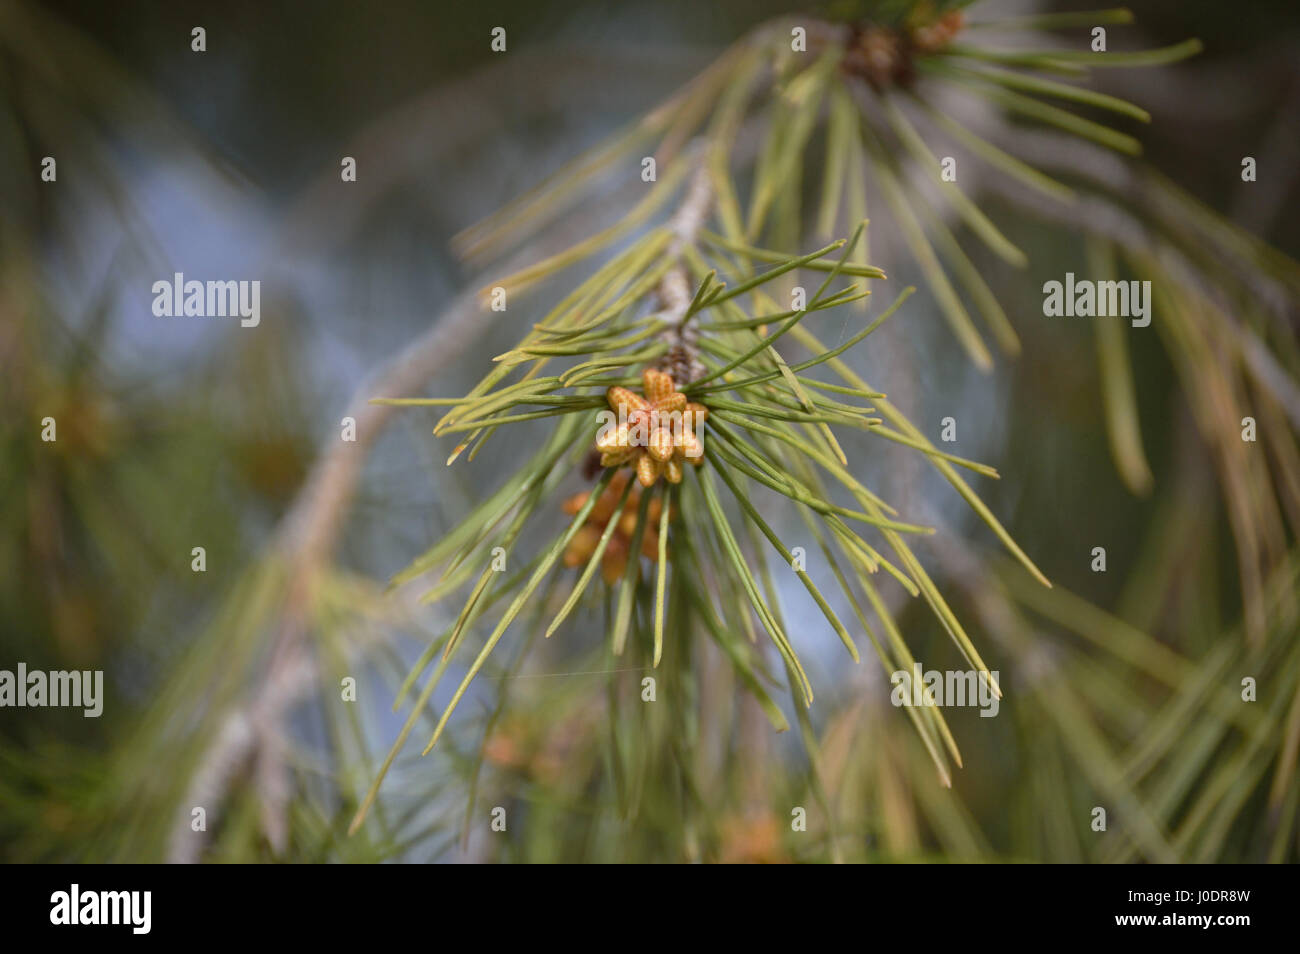 Blooming pine cone in the branch Stock Photo